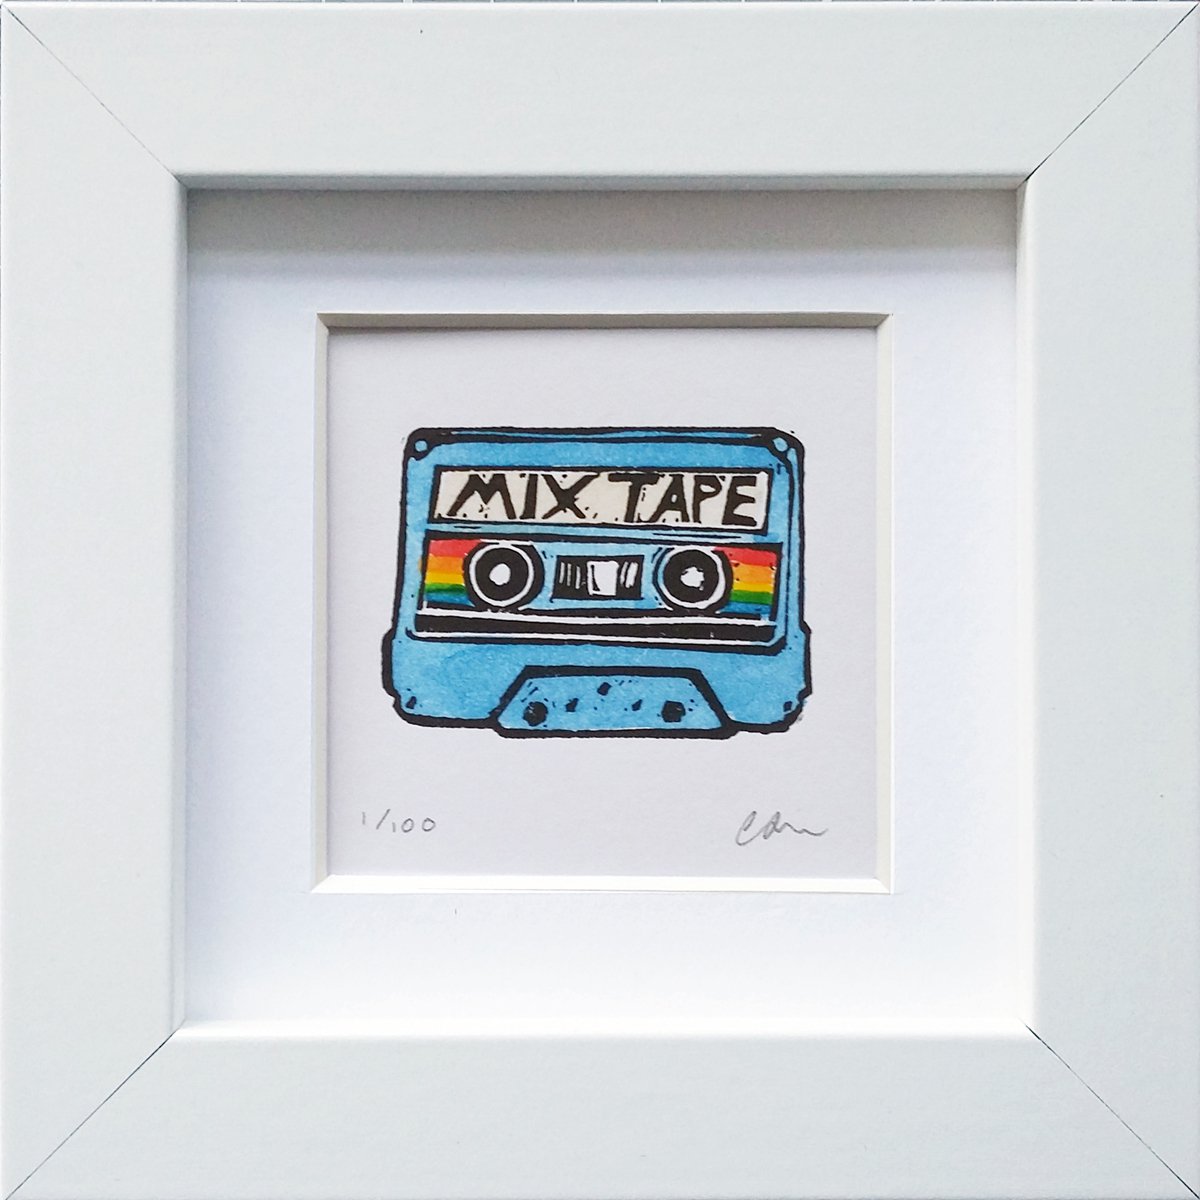 Tiny tapes - Blue Mix Tape by Carolynne Coulson